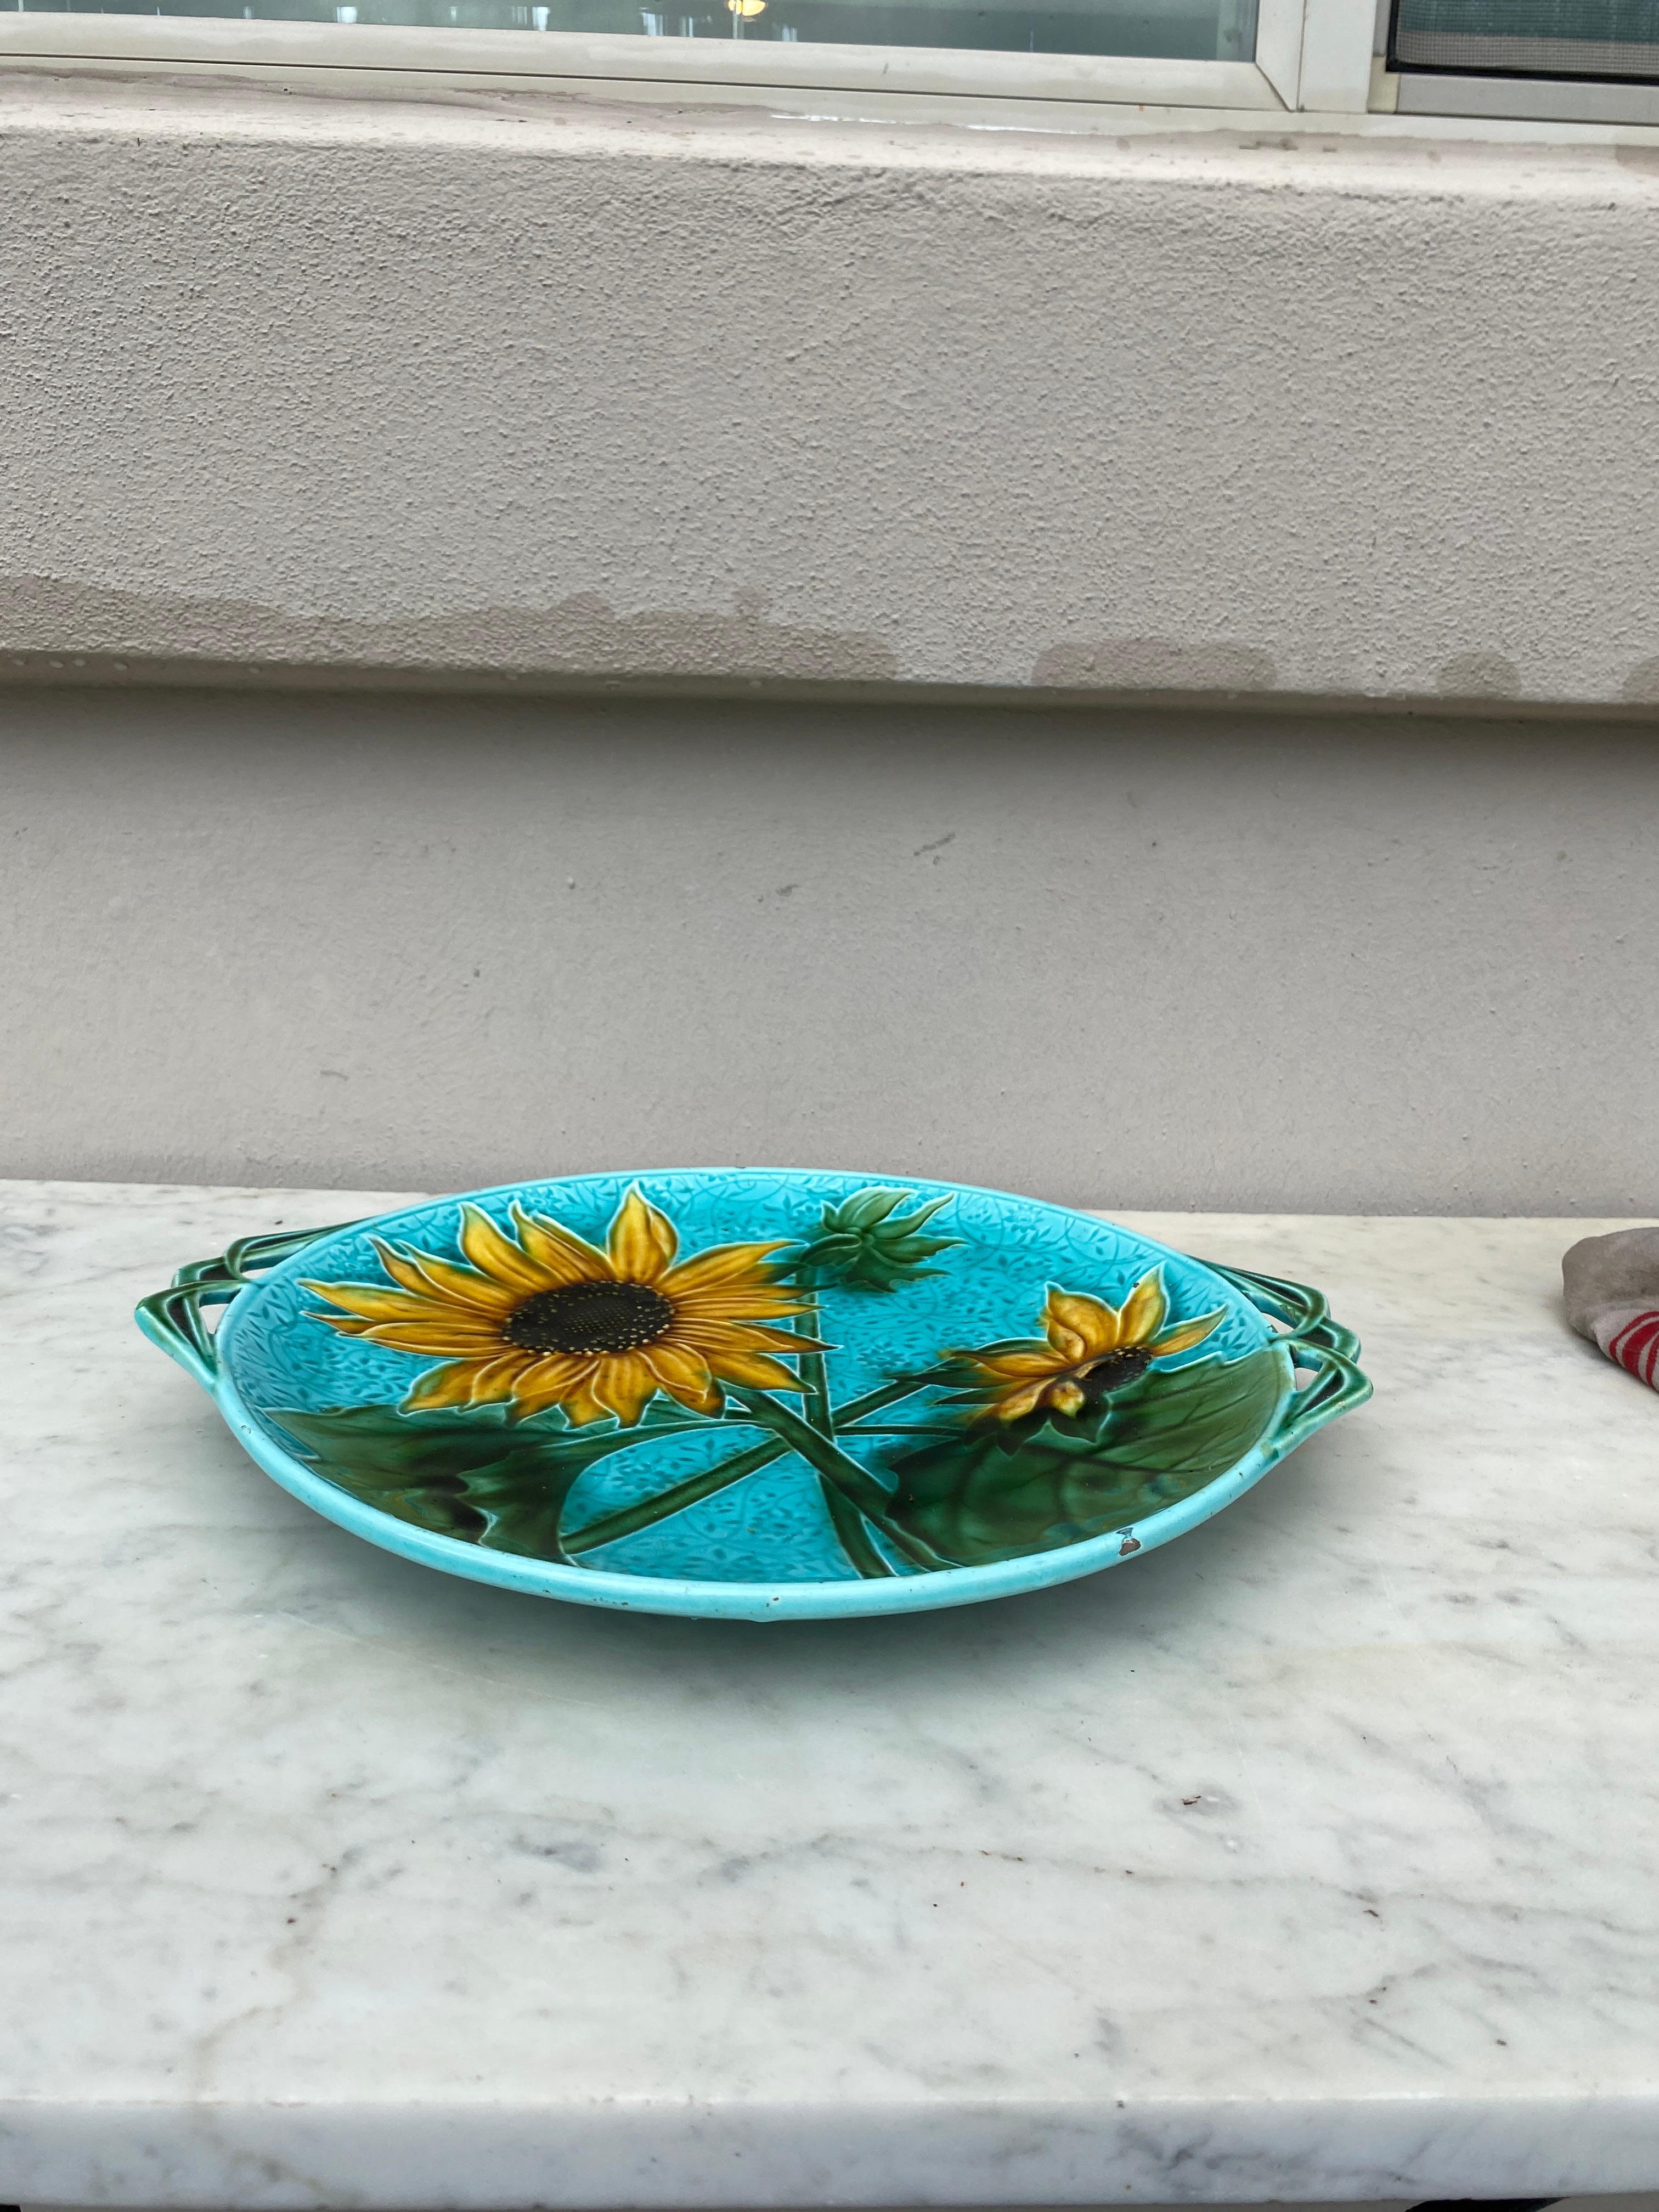 Large Majolica Sunflower Platter Villeroy & Boch, circa 1900 In Good Condition For Sale In Austin, TX